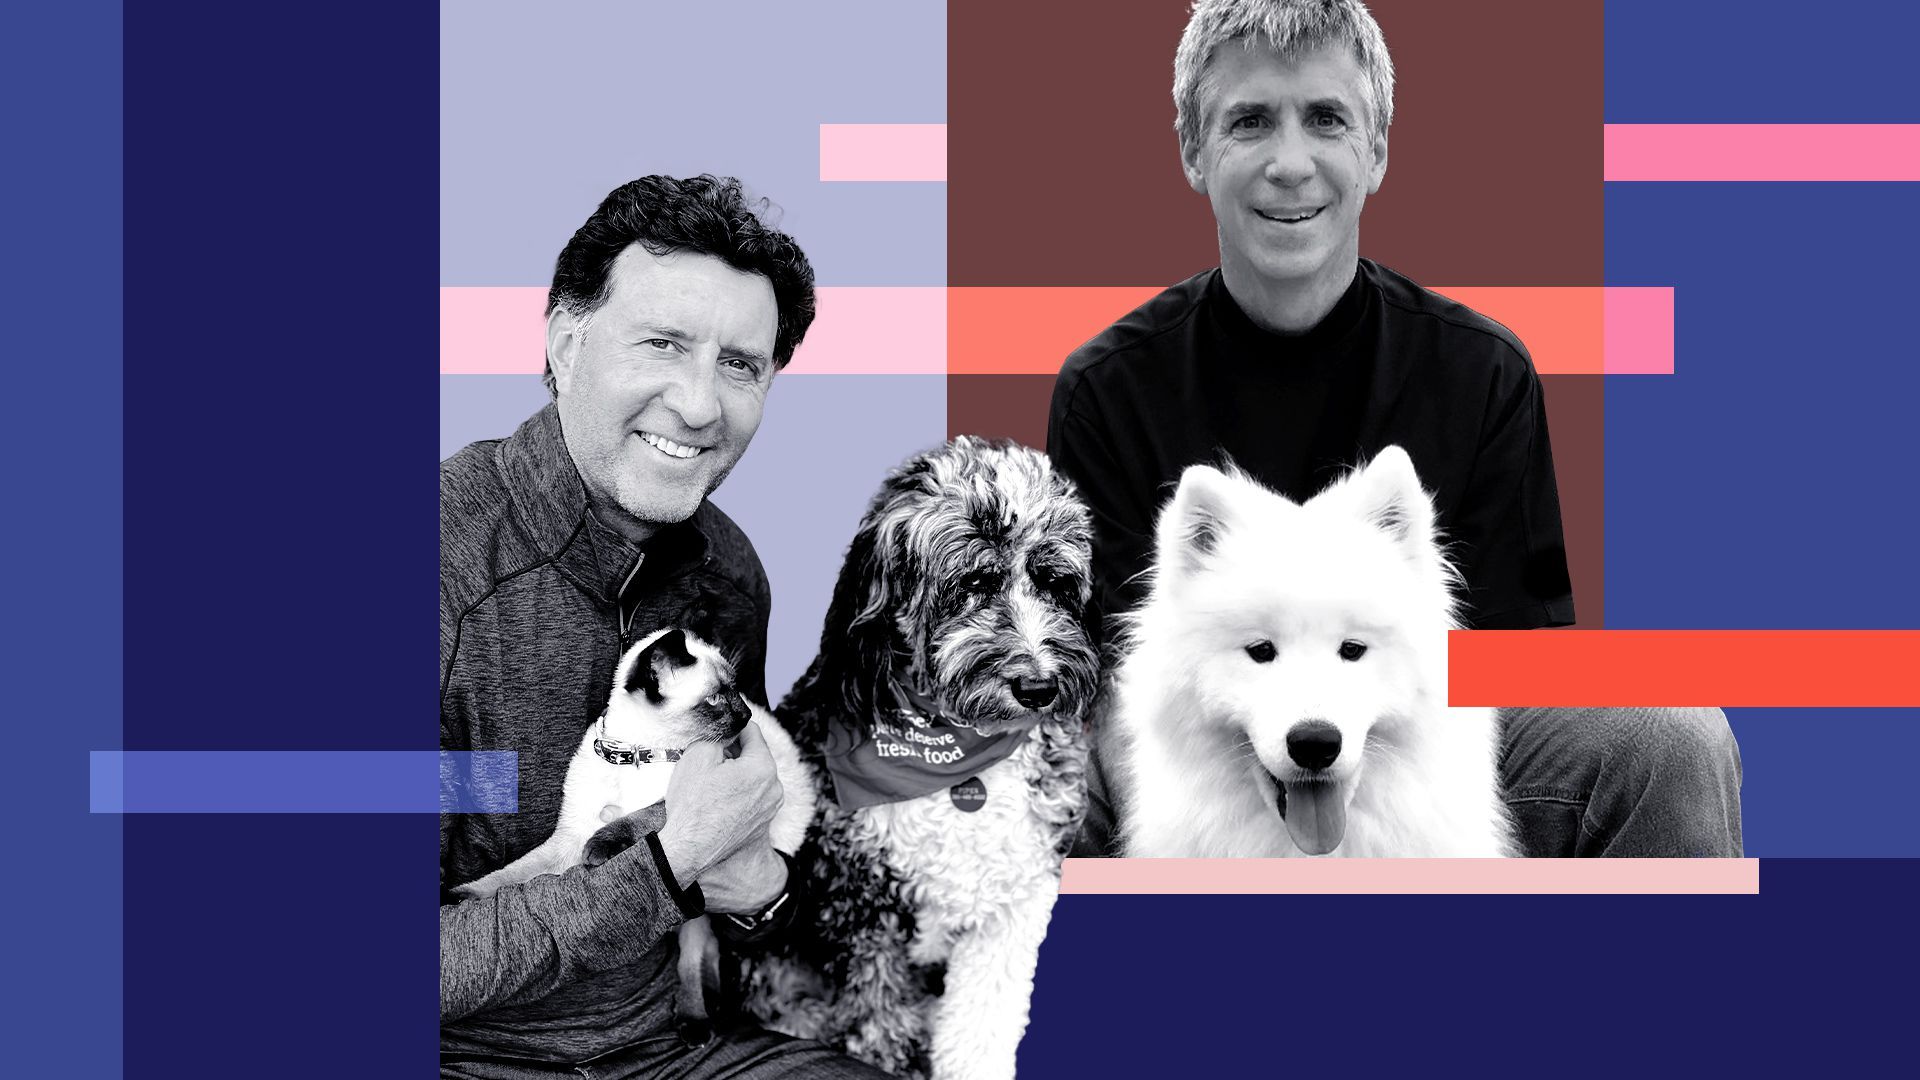 Photo illustration of Billy Cyr and Scott Morris with pets.